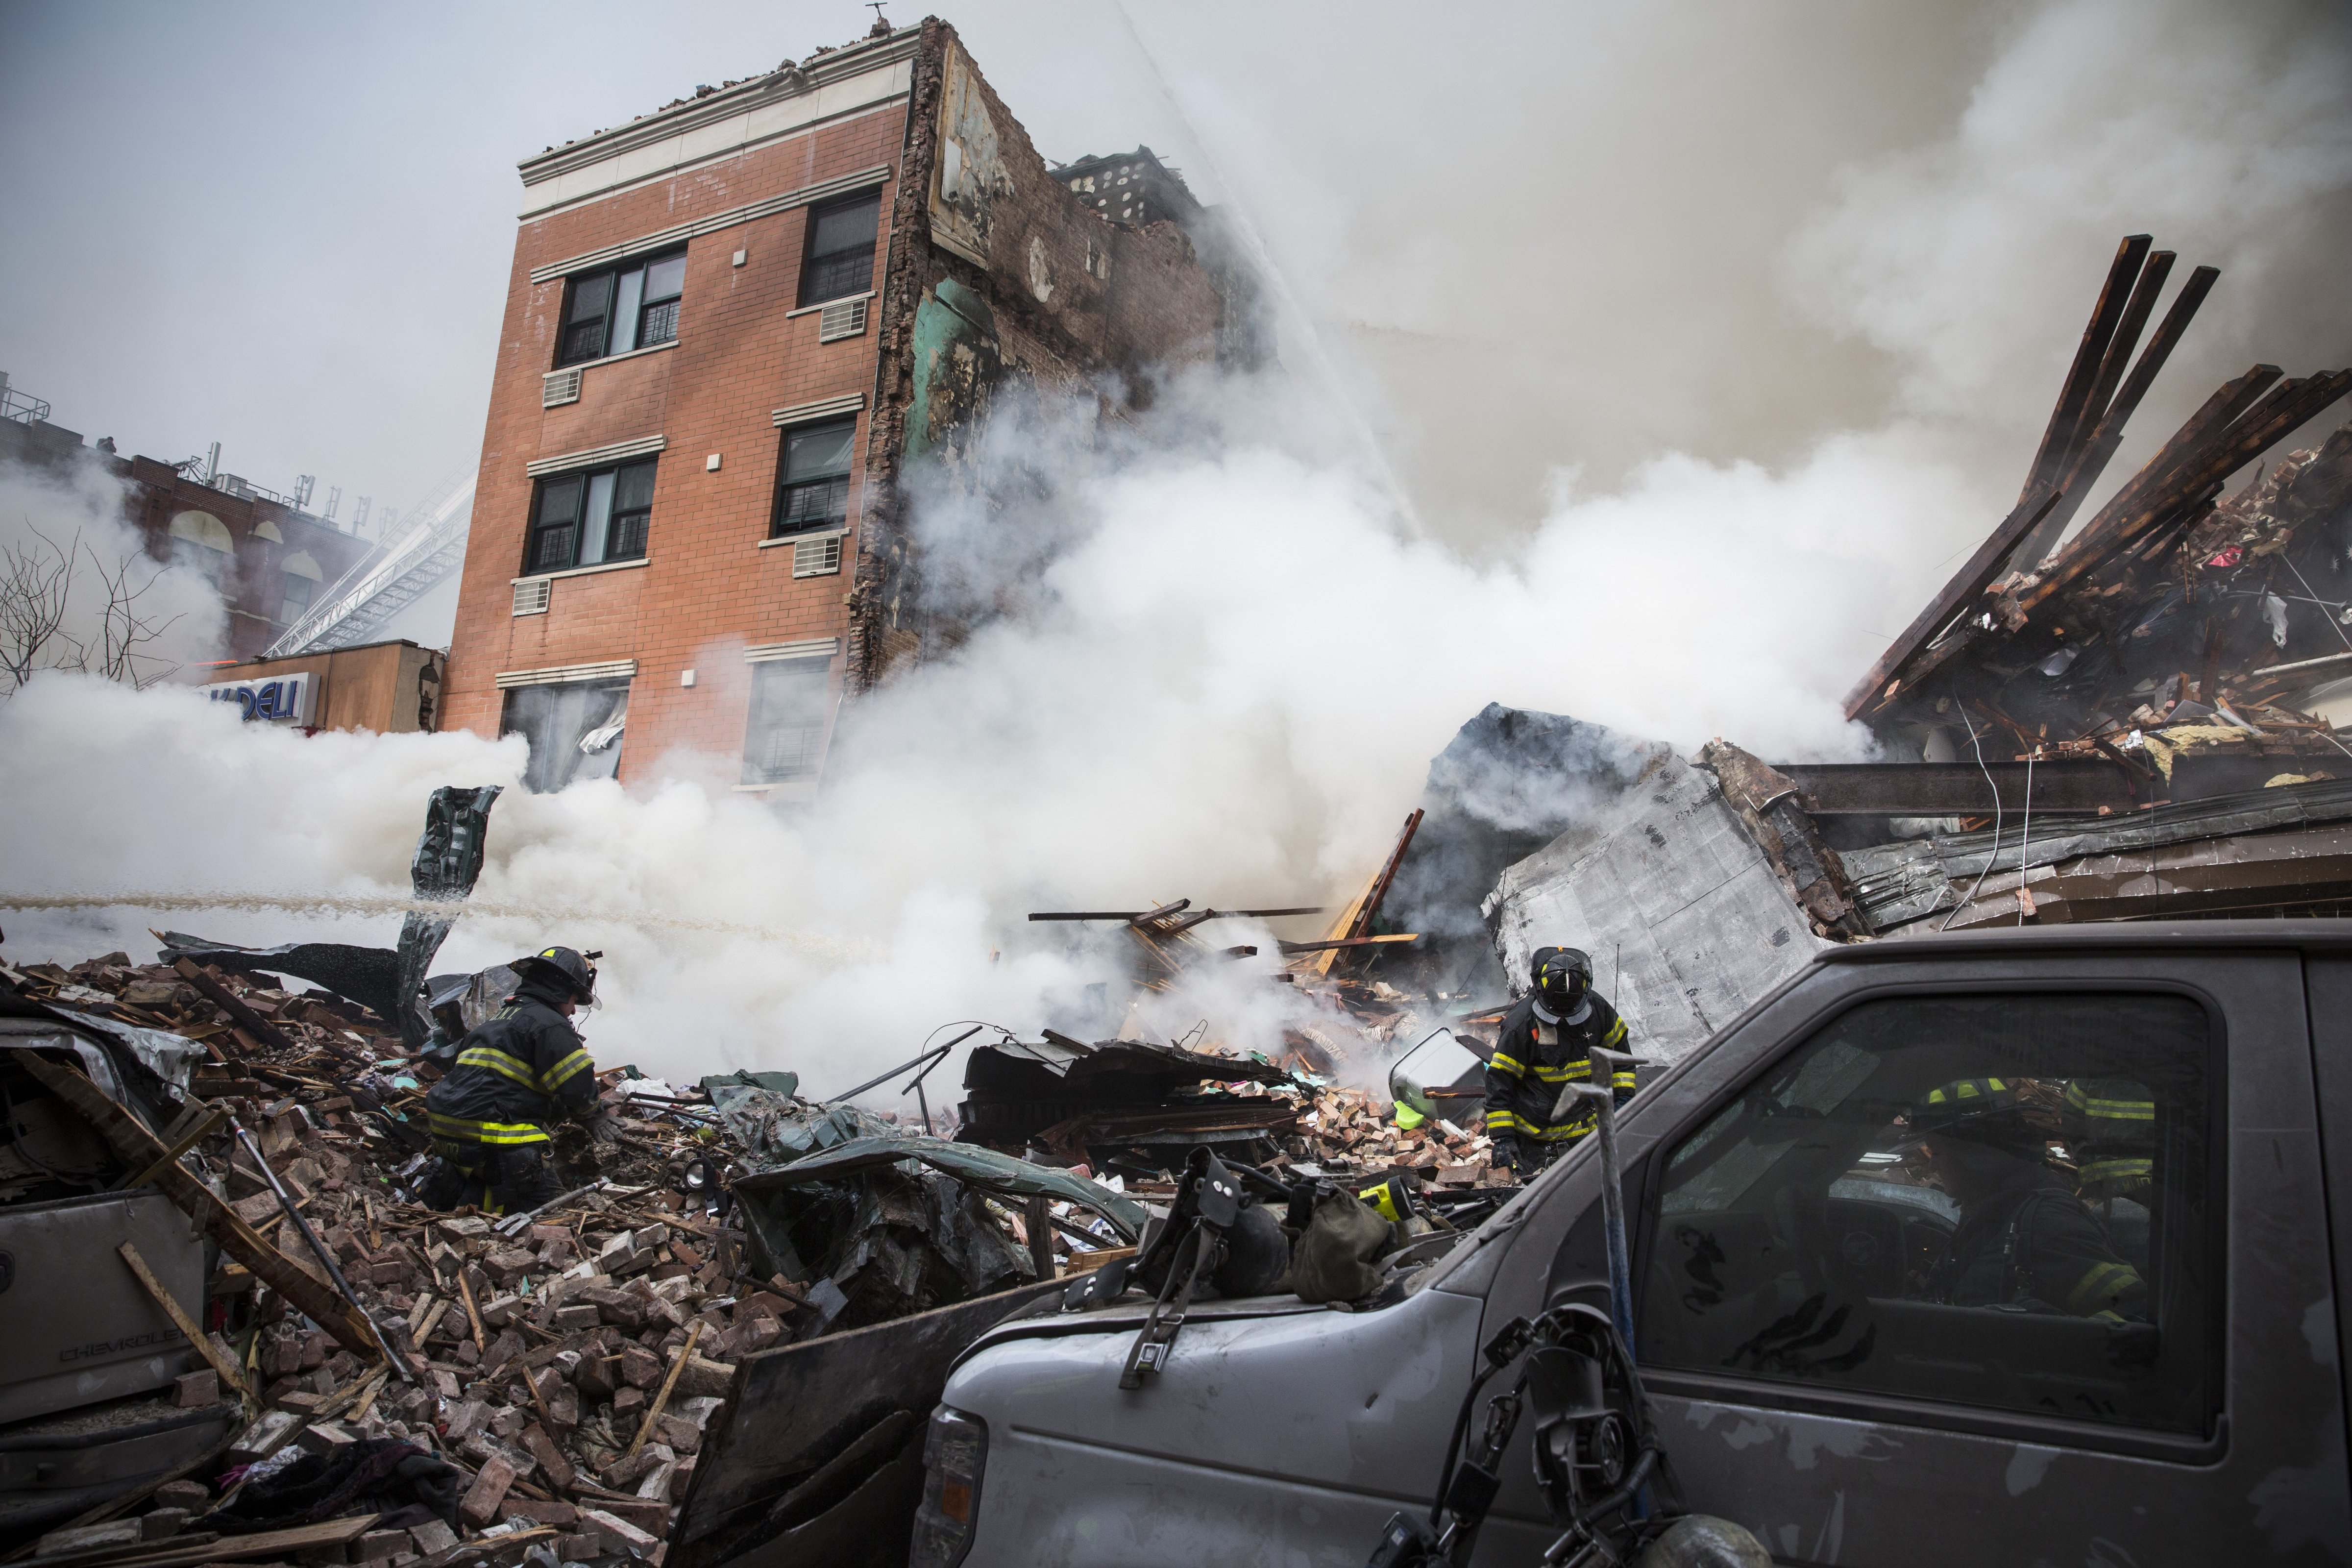 Smoke pours from the debris as the Fire Department of New York responds to a fire and building collapse at 1646 Park Ave in the Harlem 